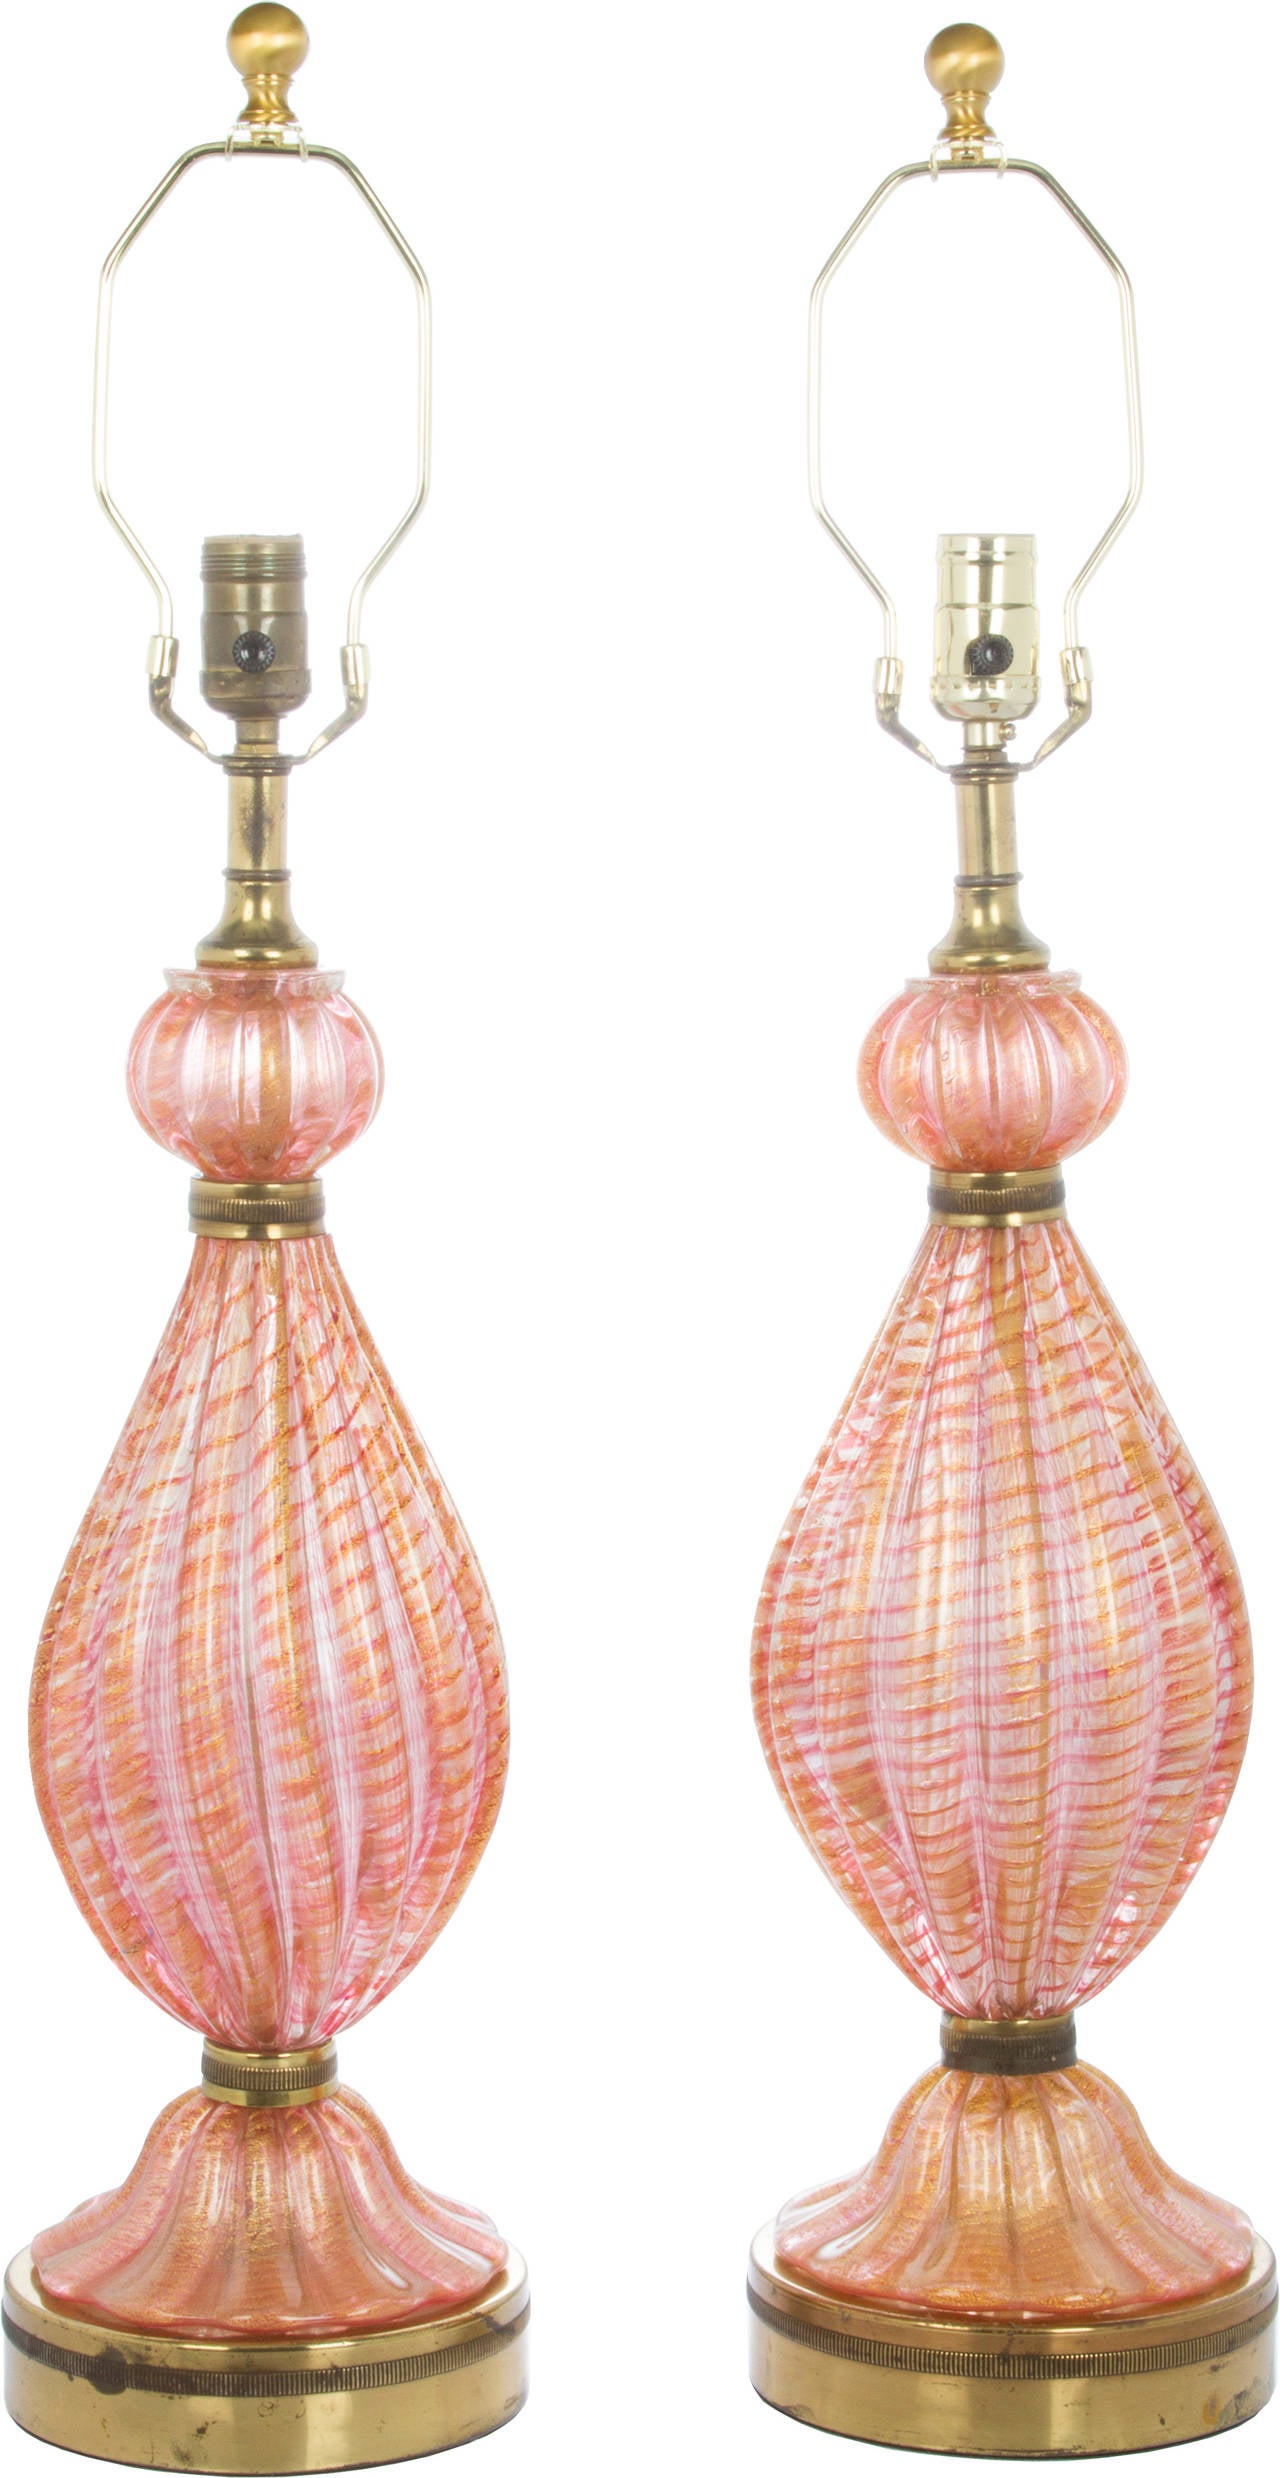 These are beautiful lamps in a coral rose color laced with gold.